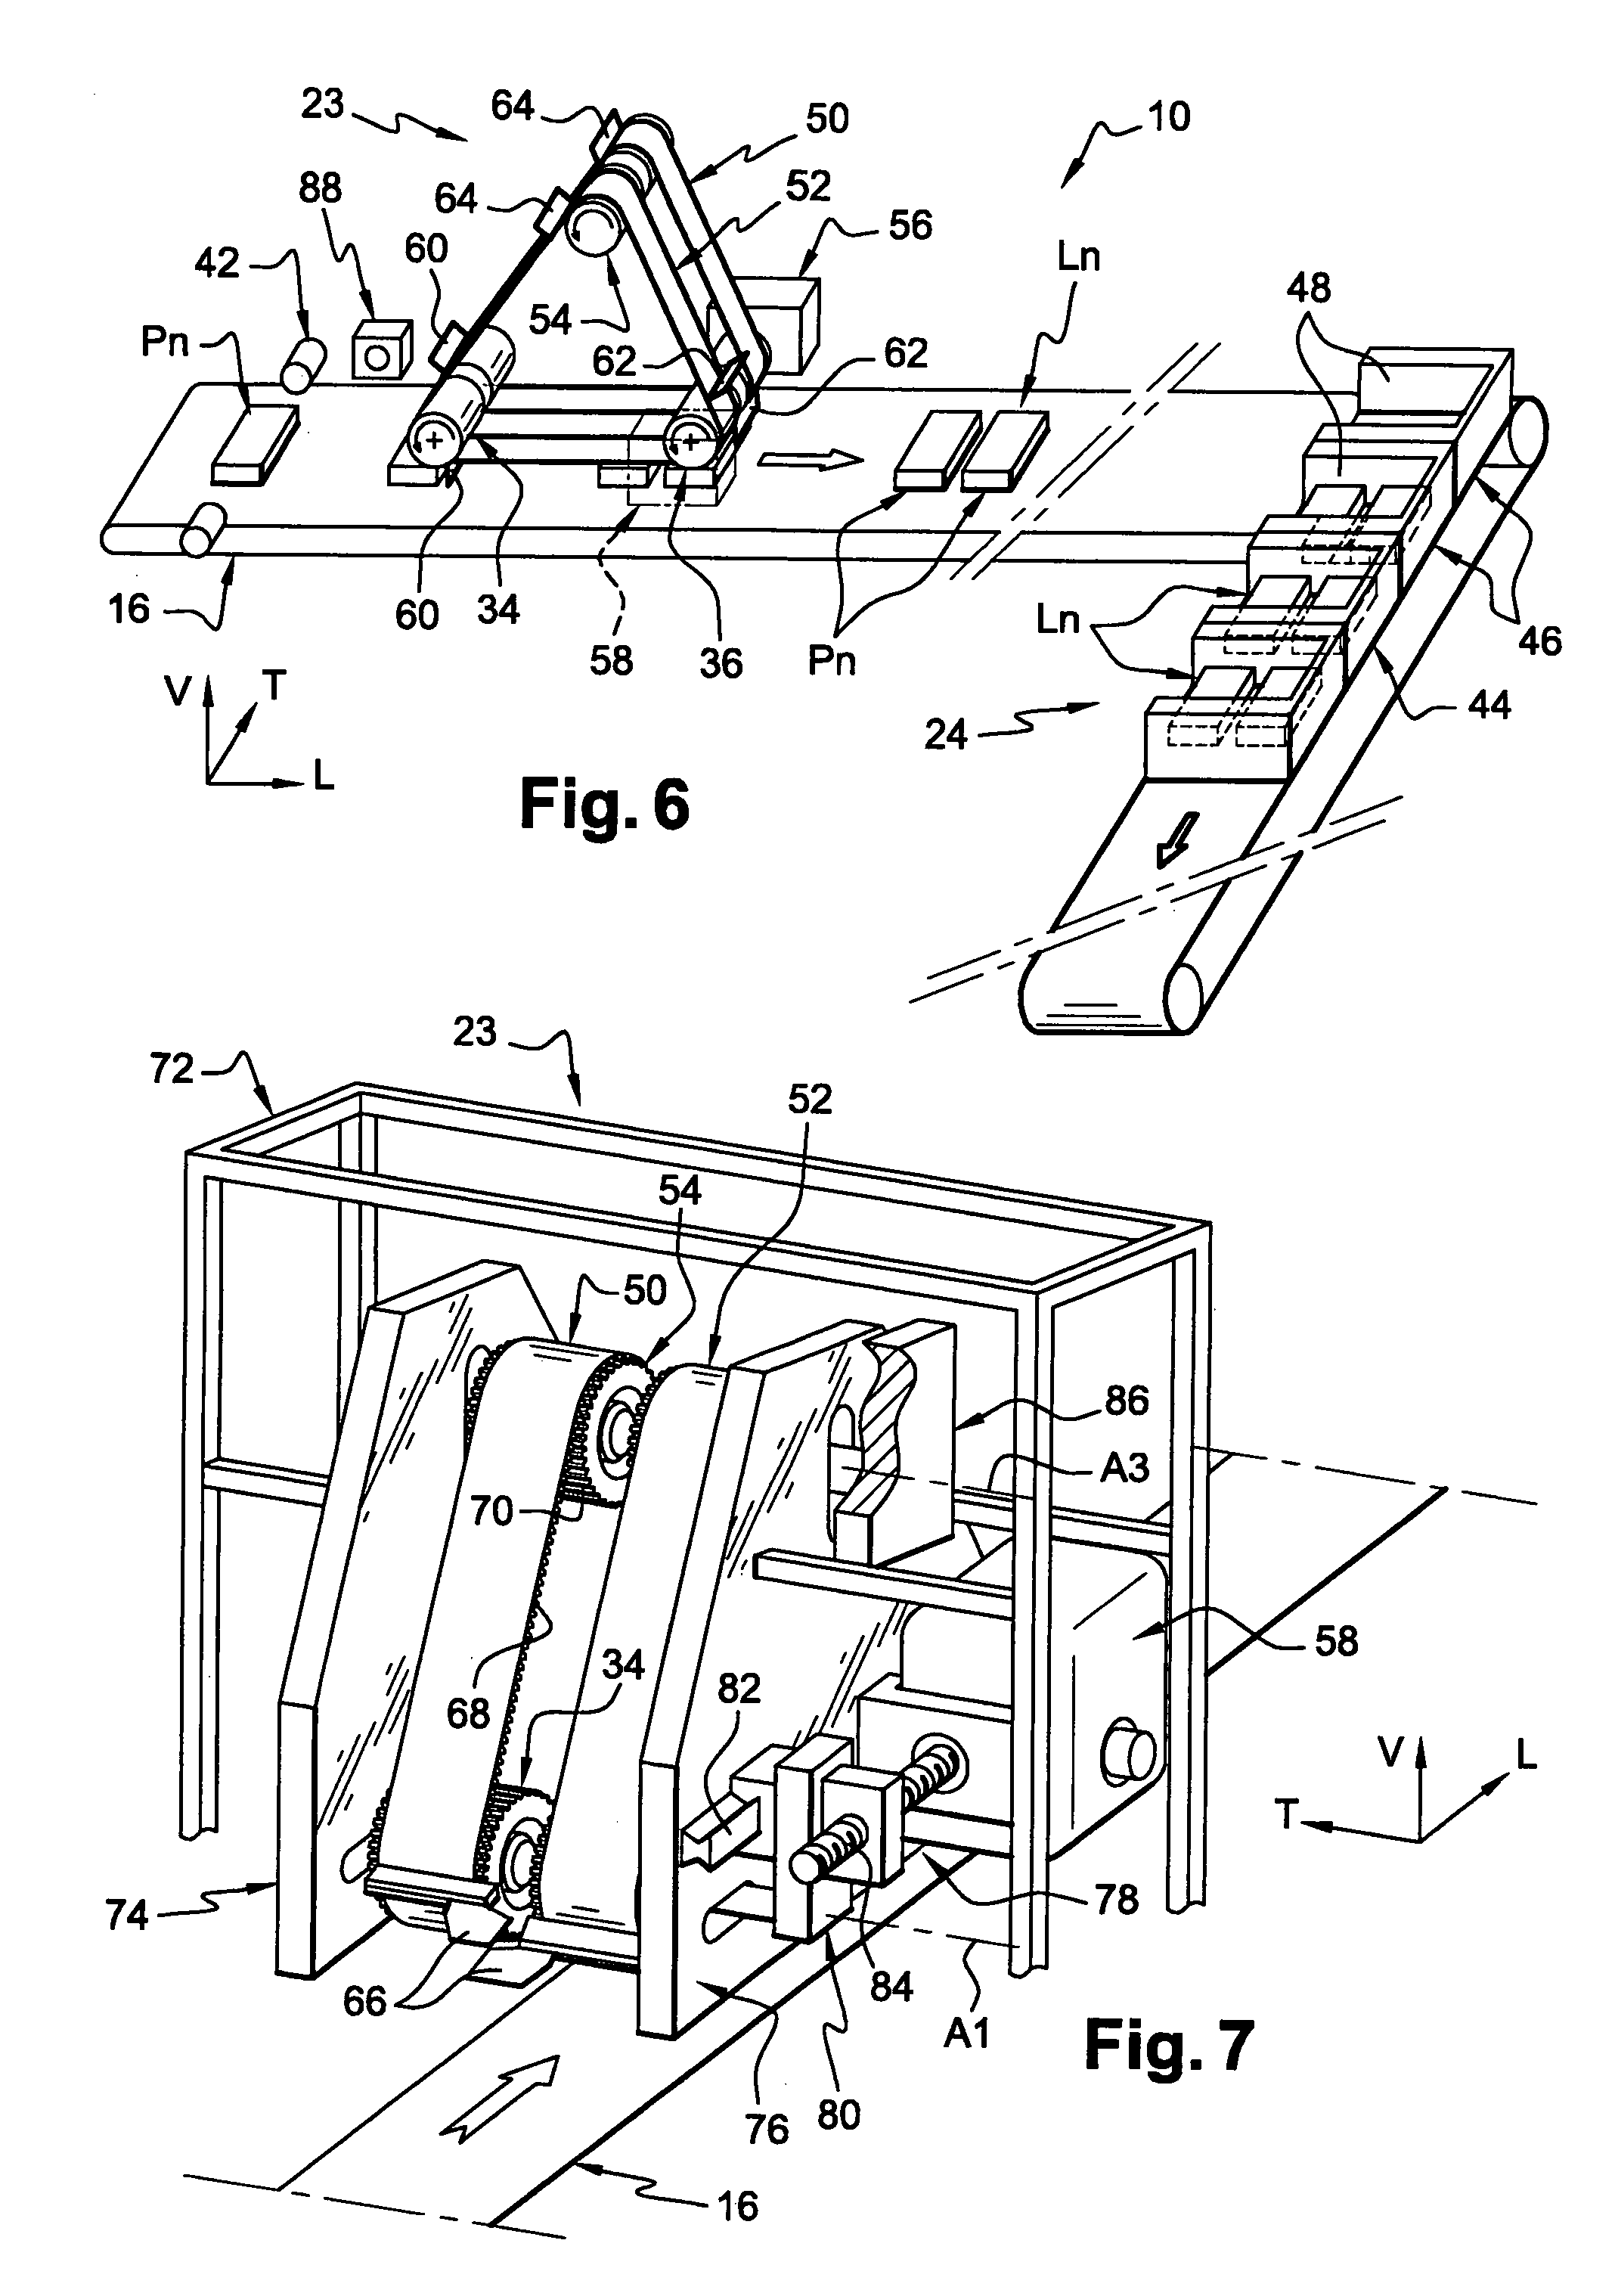 Arrangement for assembling products in batches on high-speed conveyor belt